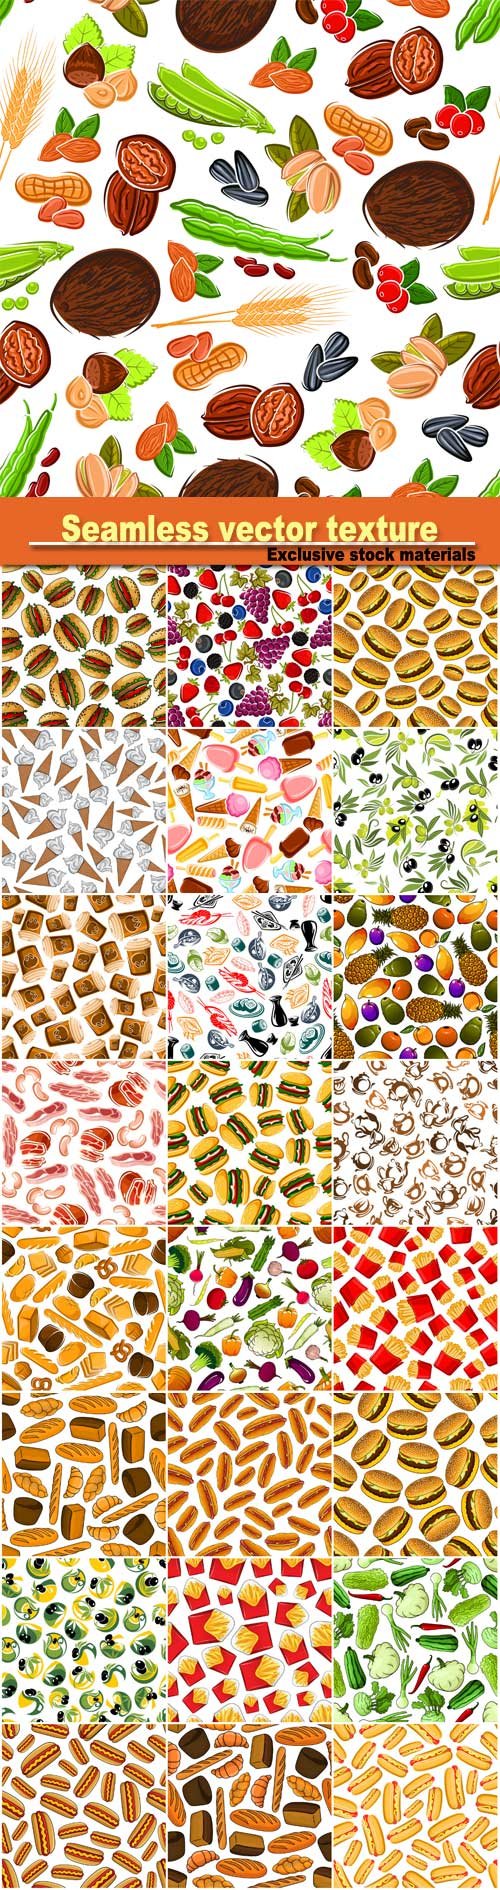 Seamless vector texture with food